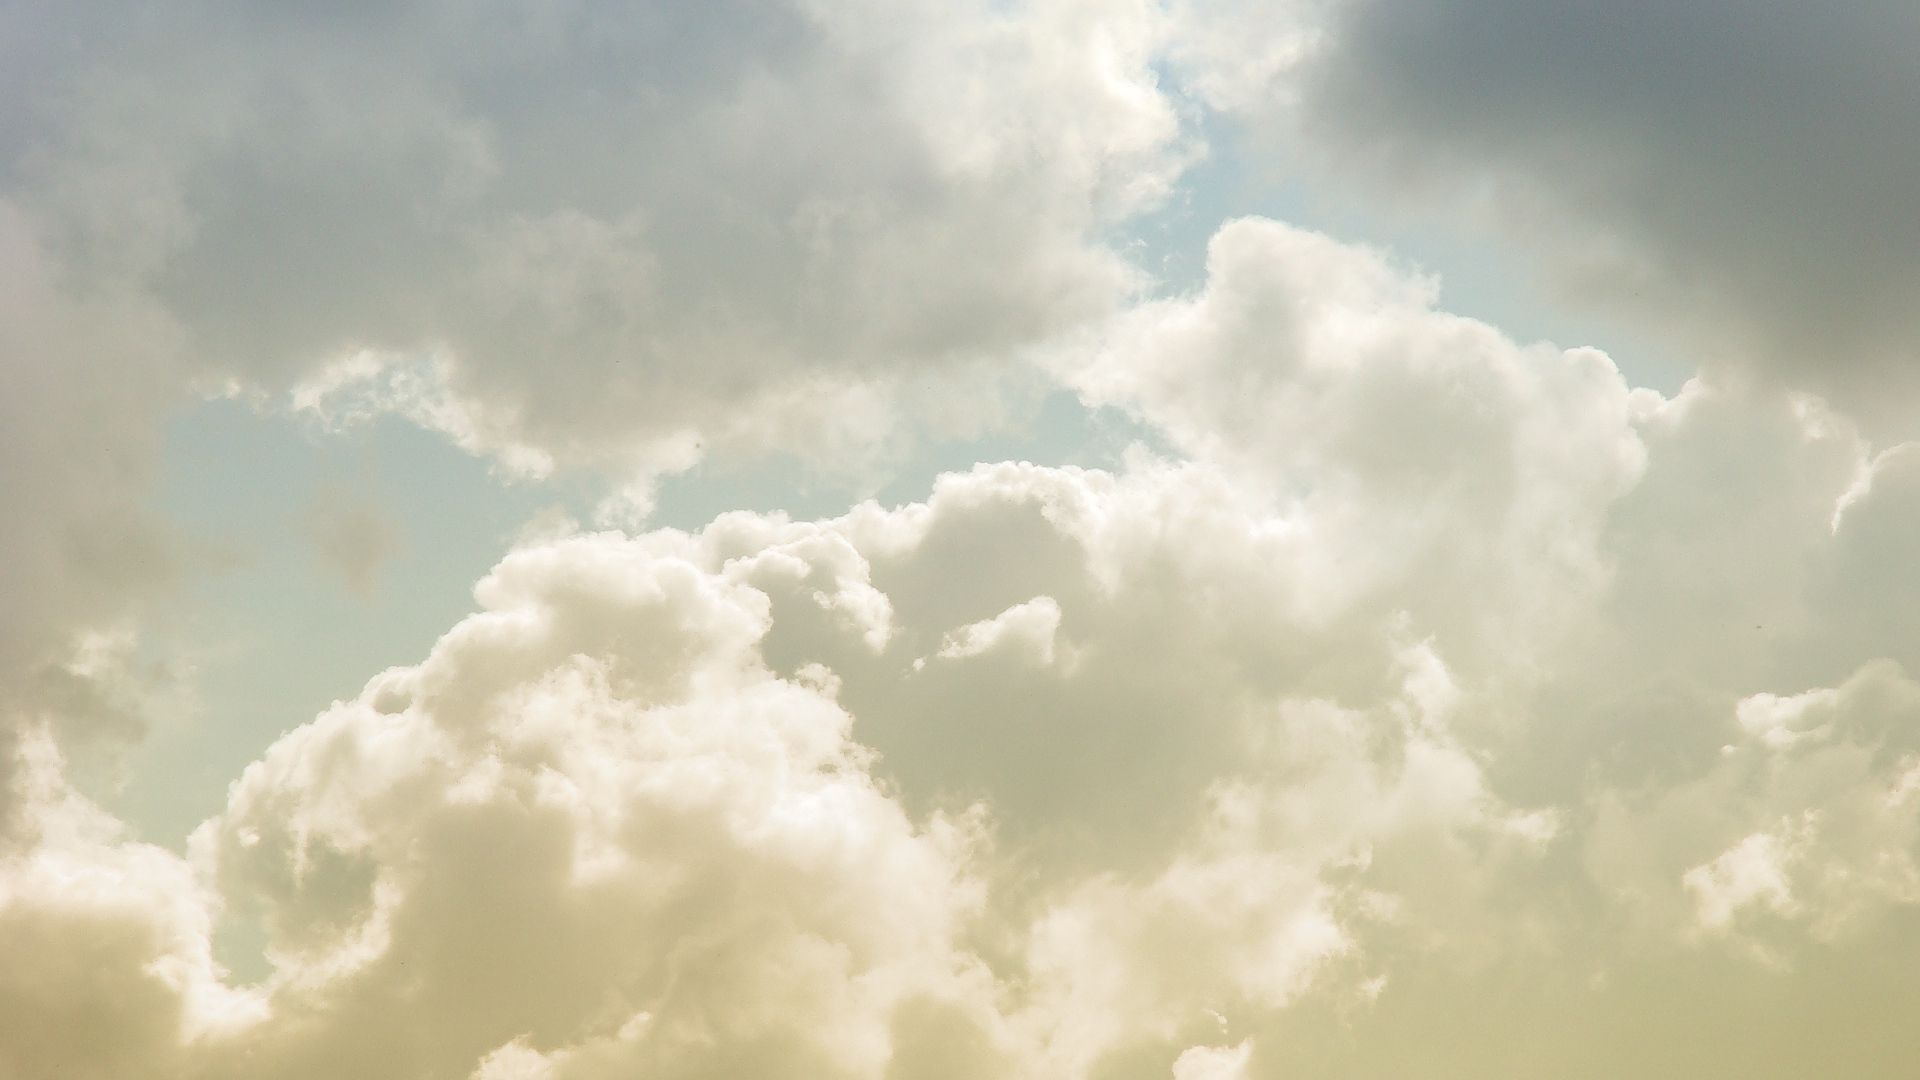 Cloud Aesthetic Background for PC Free Download